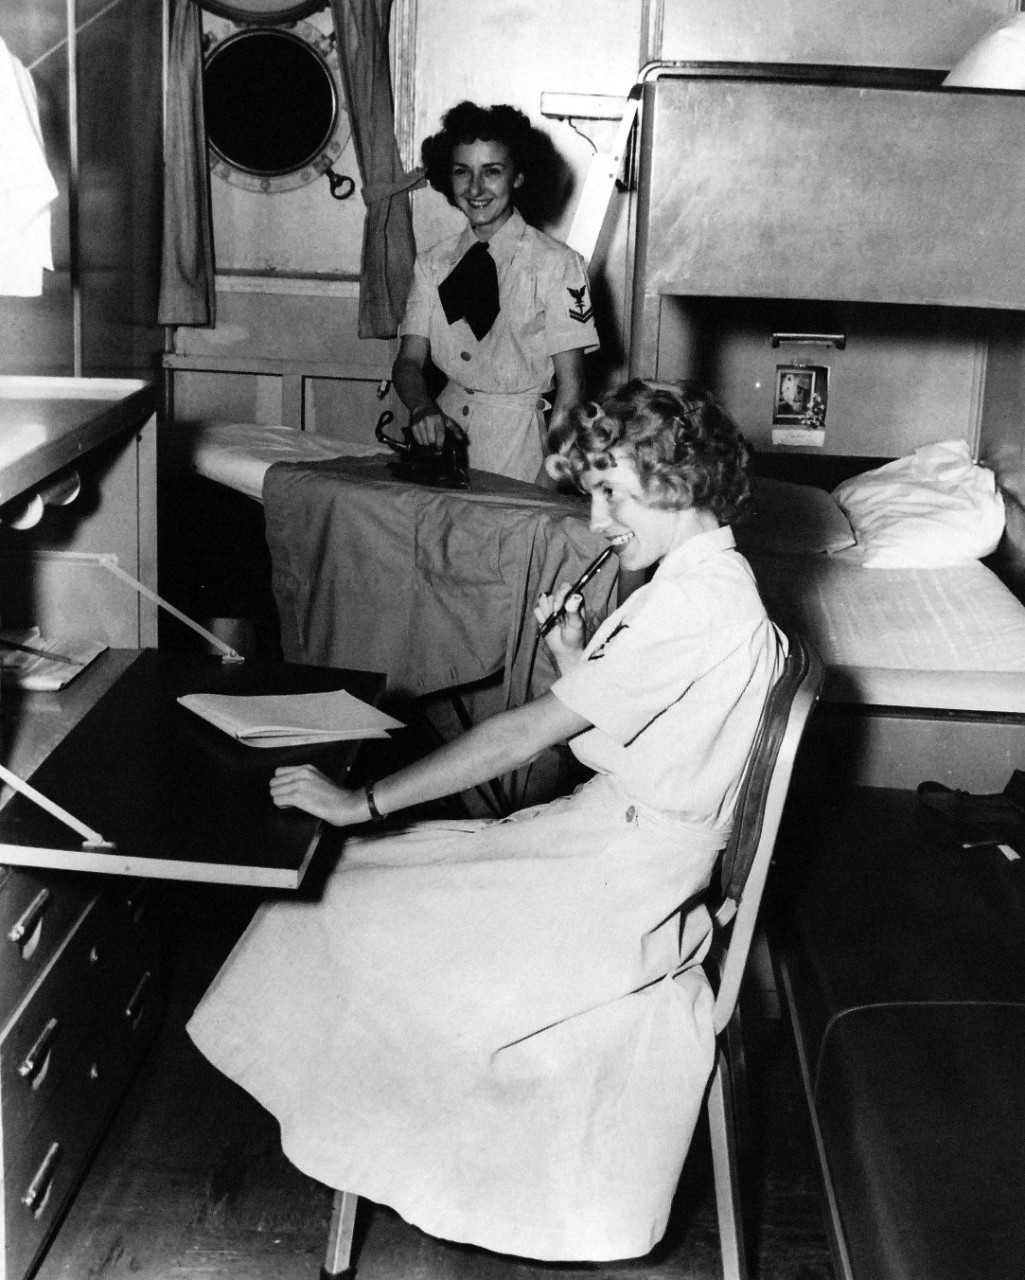 USN 709038:   Navy Accepts Women Volunteers for Duty on High Seas, October 1953.   Evenings and spare time isn’t always spent in recreation.  In their cabin on board USNS George M. Goethals (T-AP-182) , both WAVES have personal things to care for.  While Hospital Corpsman Third Class Maria A. Myers ponders over what to say in that special letter, Hospital Corpsman Second Class Eileen Paluzzi irons her smock.   For the first time in history, the U.S. Navy has accepted volunteers for duty on the high seas from women in the enlisted WAVES.  Those eligible were WAVES of the Hospital Corps to fill sixty-three billets on ships of the Military Sea Transportation Service.  Photograph released October 26, 1953.    Official U.S. Navy photograph, now in the collections of the National Archives.   